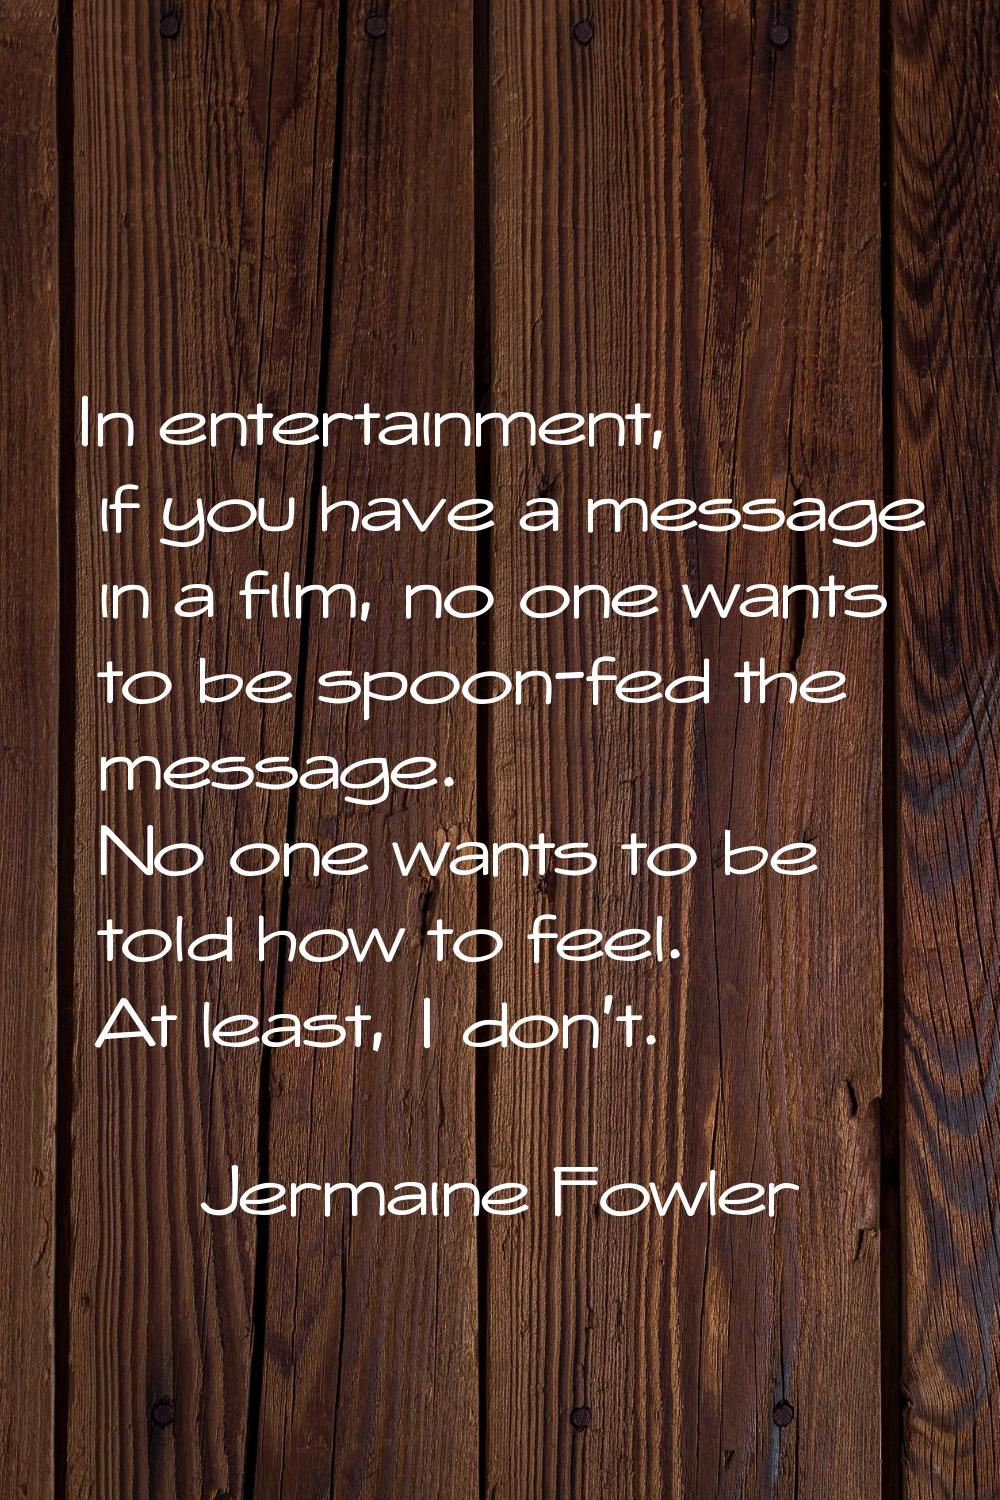 In entertainment, if you have a message in a film, no one wants to be spoon-fed the message. No one